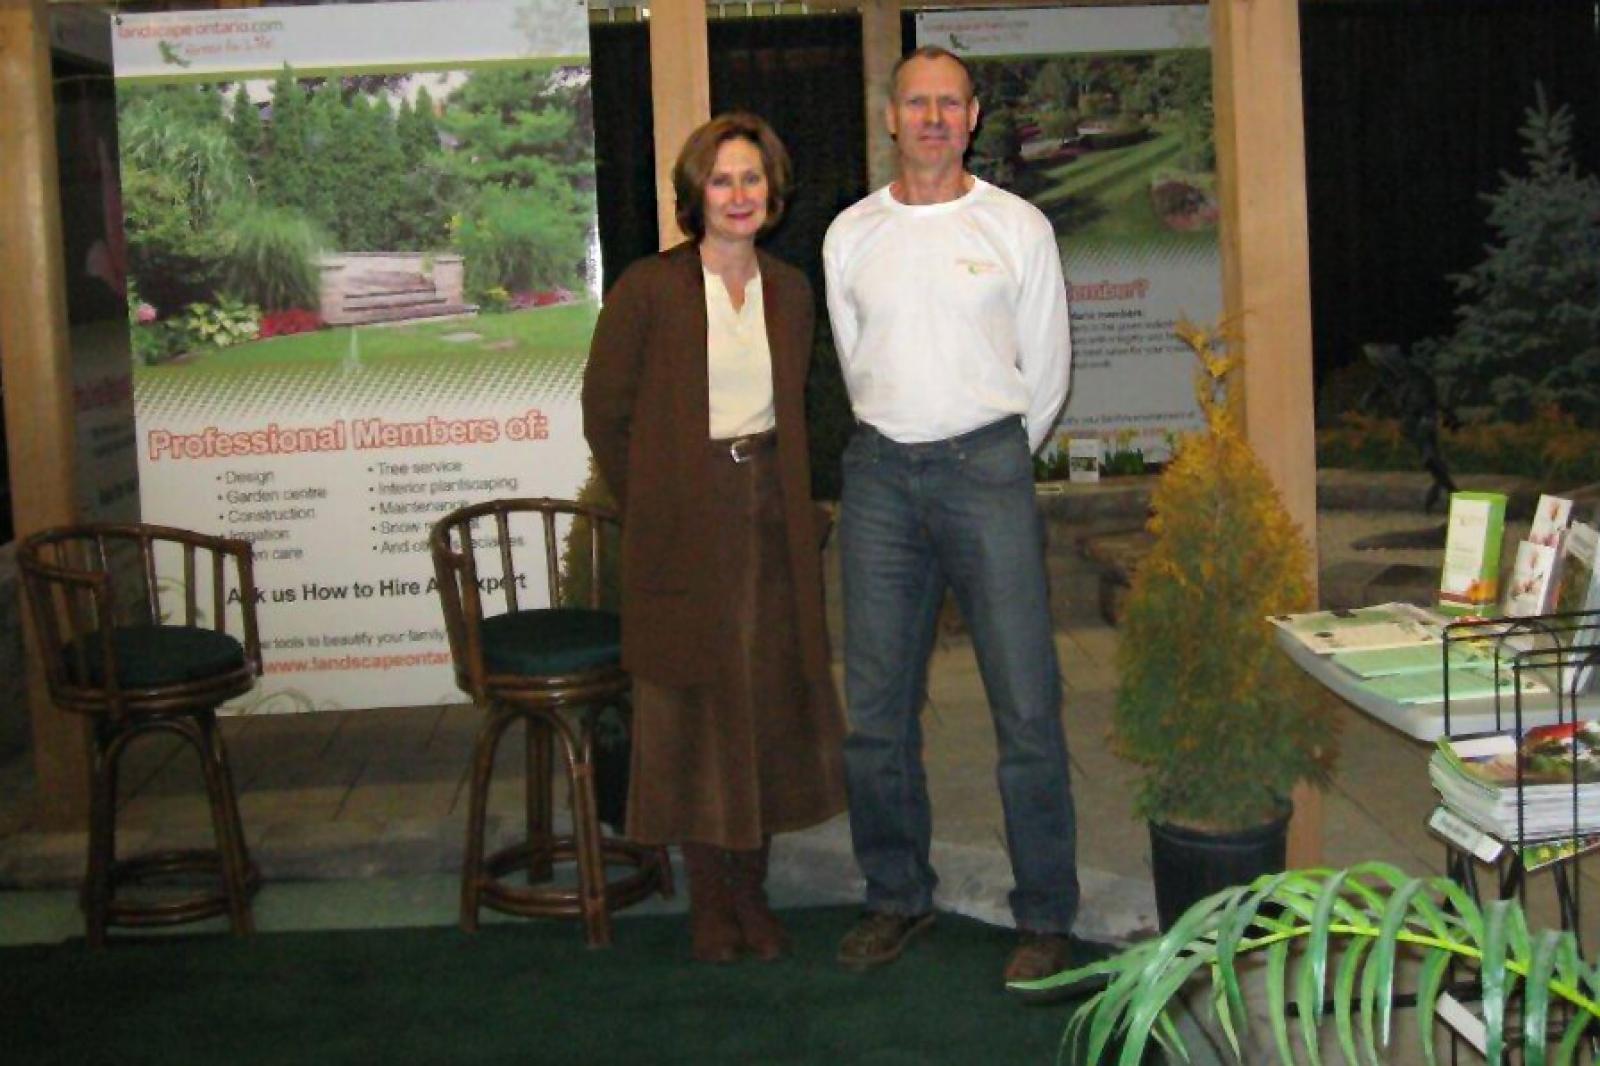 London Chapter garden showcased at home show